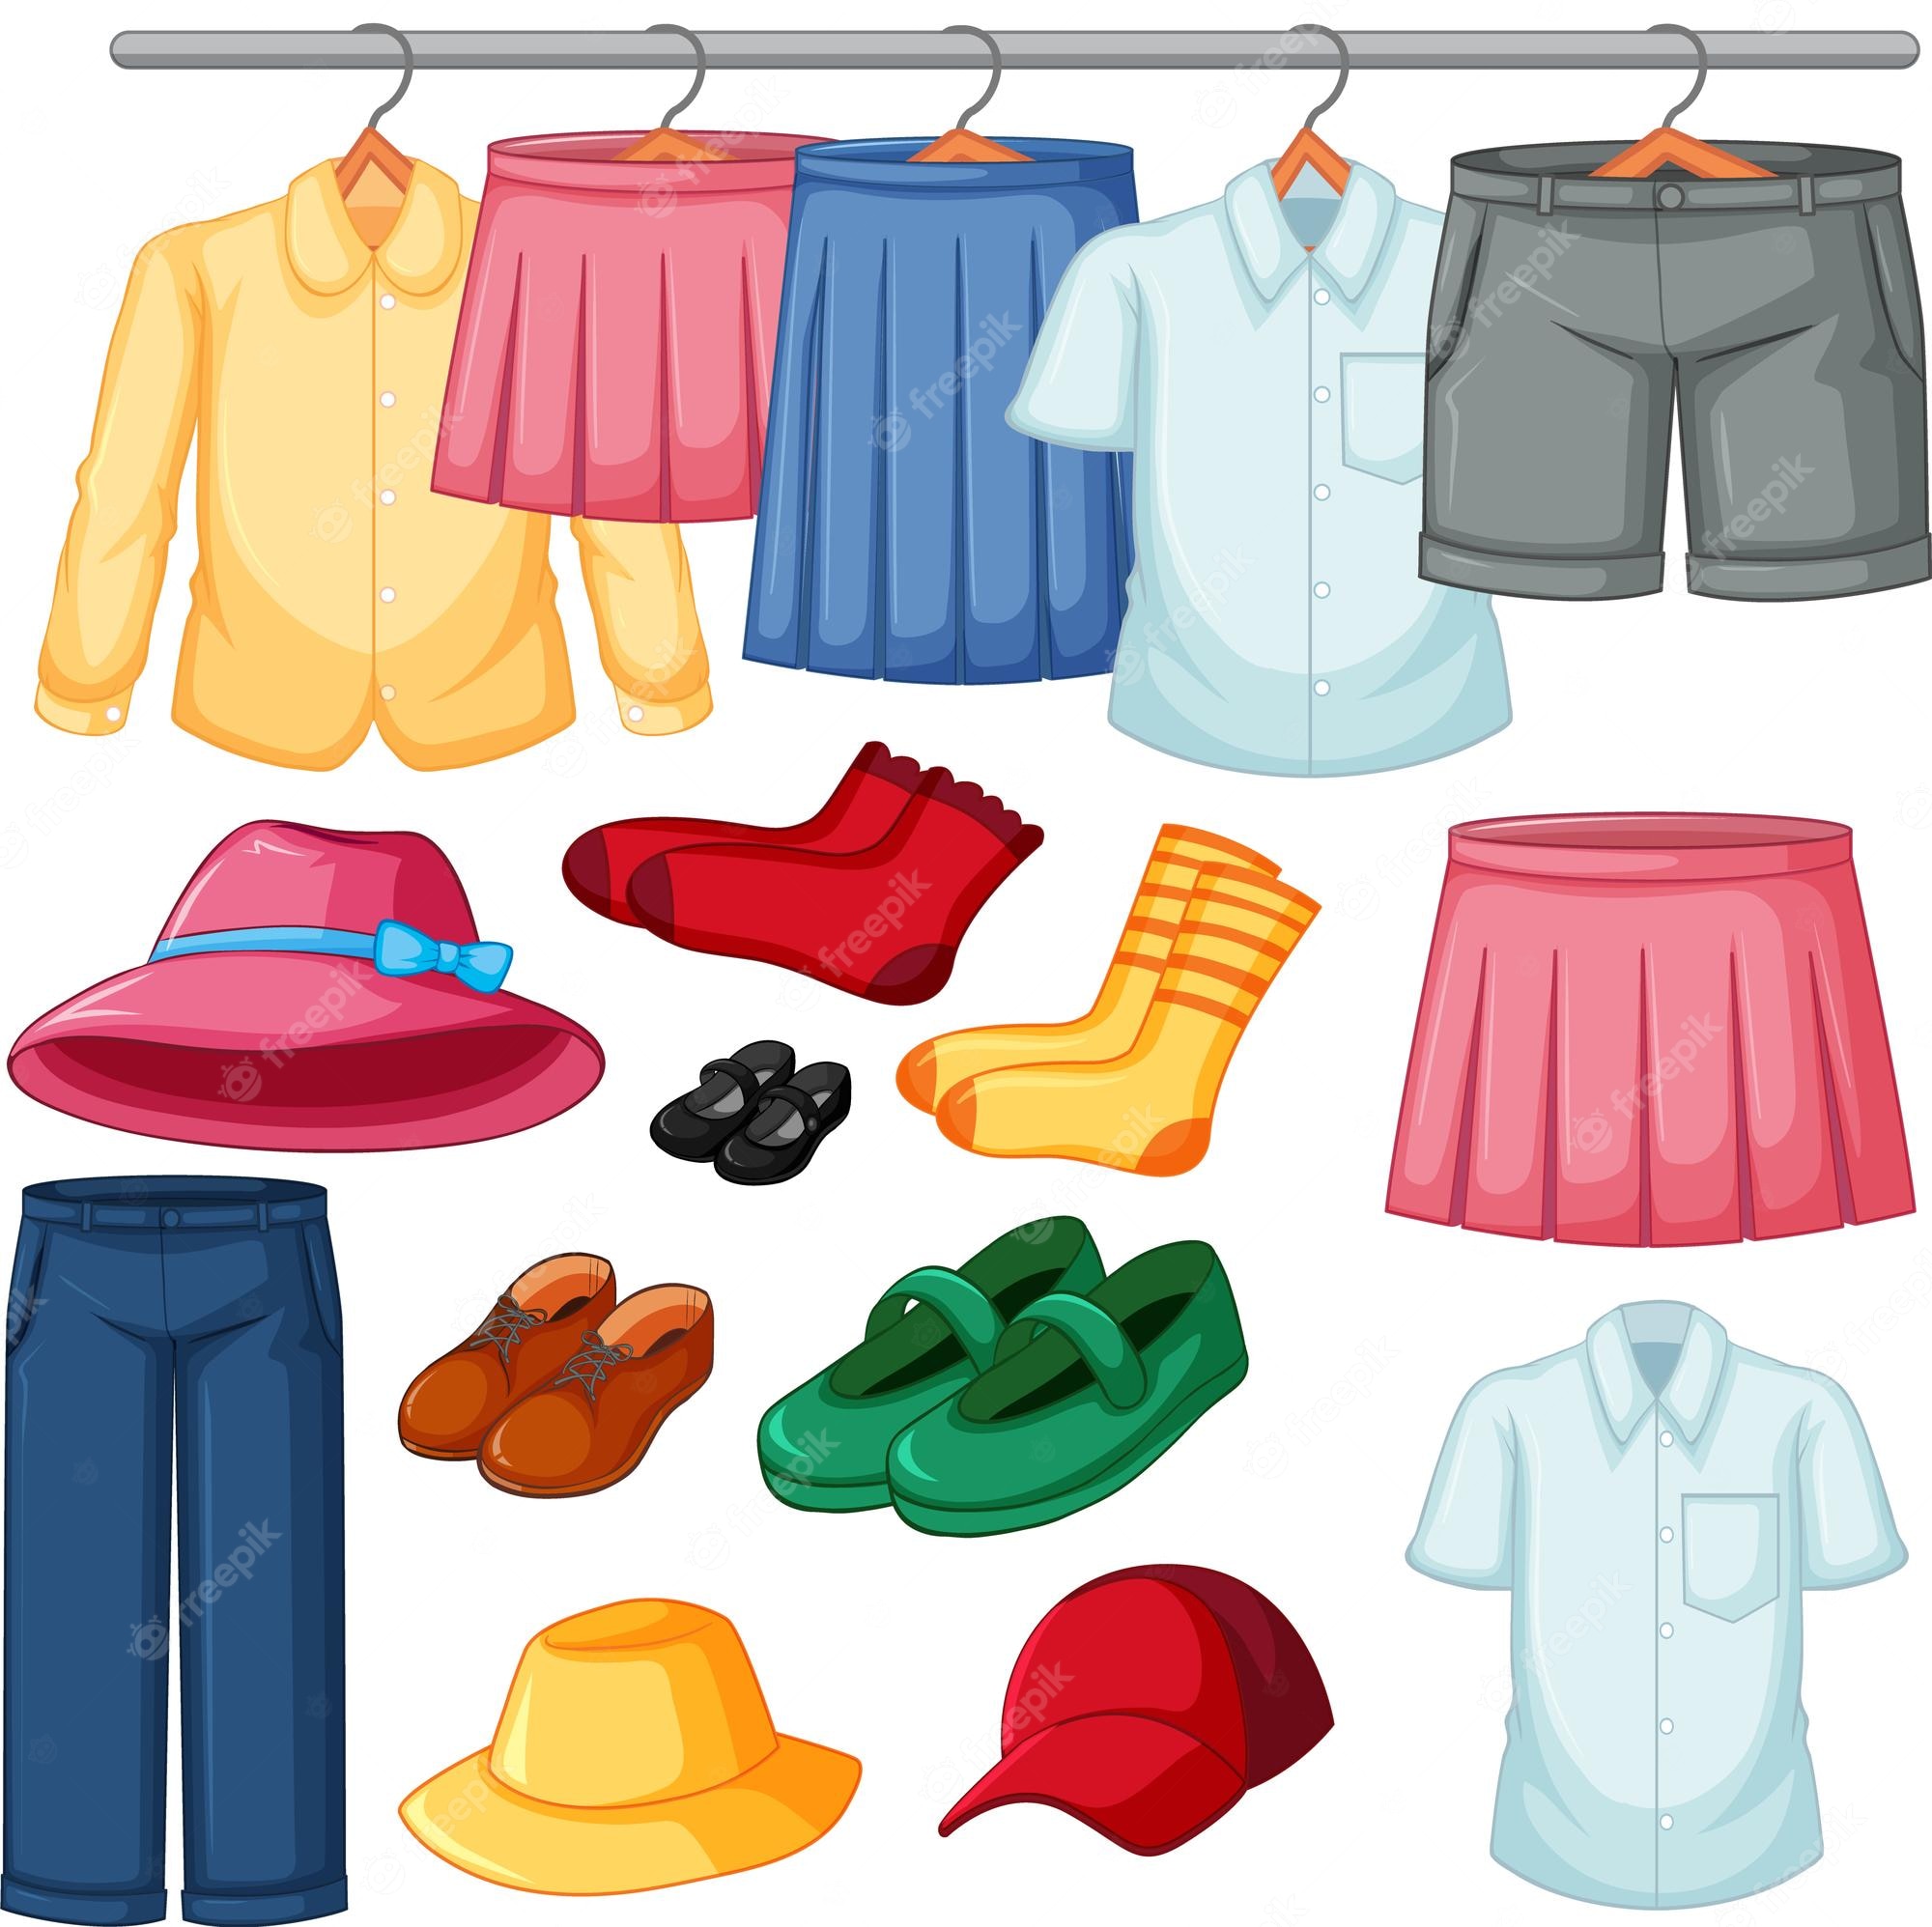 Cloth Vector Art PNG, Clothes, Clothes Clipart, Cartoon PNG Image For Free  Download